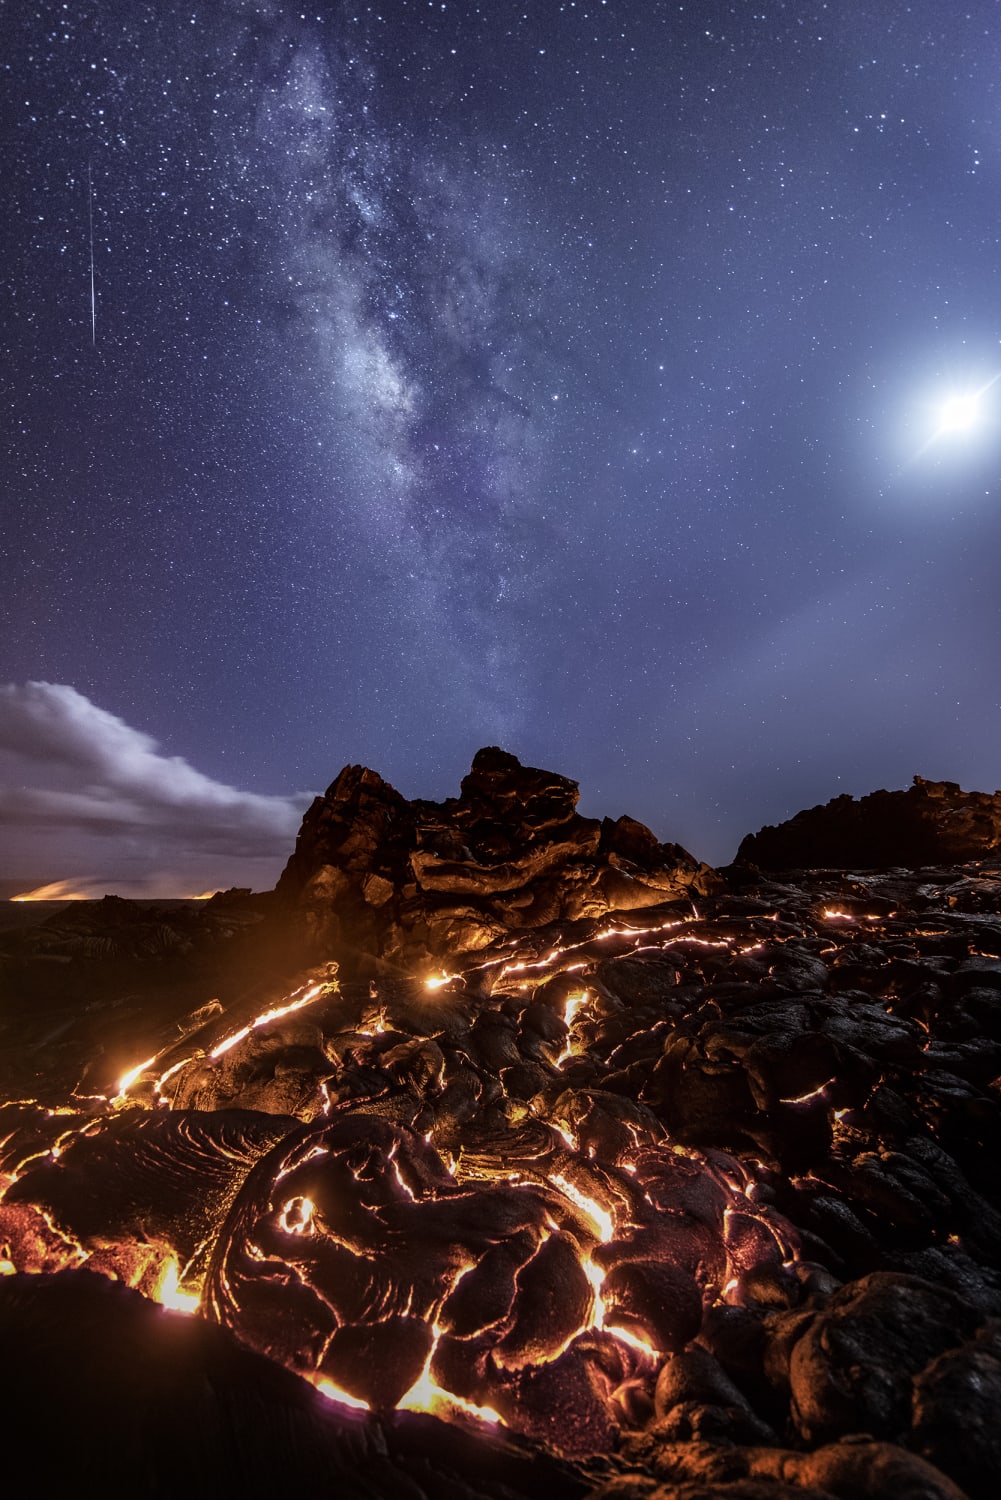 This photo shows Lava, our Galaxy and a Meteor all at once. Kilauea Volcano, Hawaii. By Mike Mezeul II .